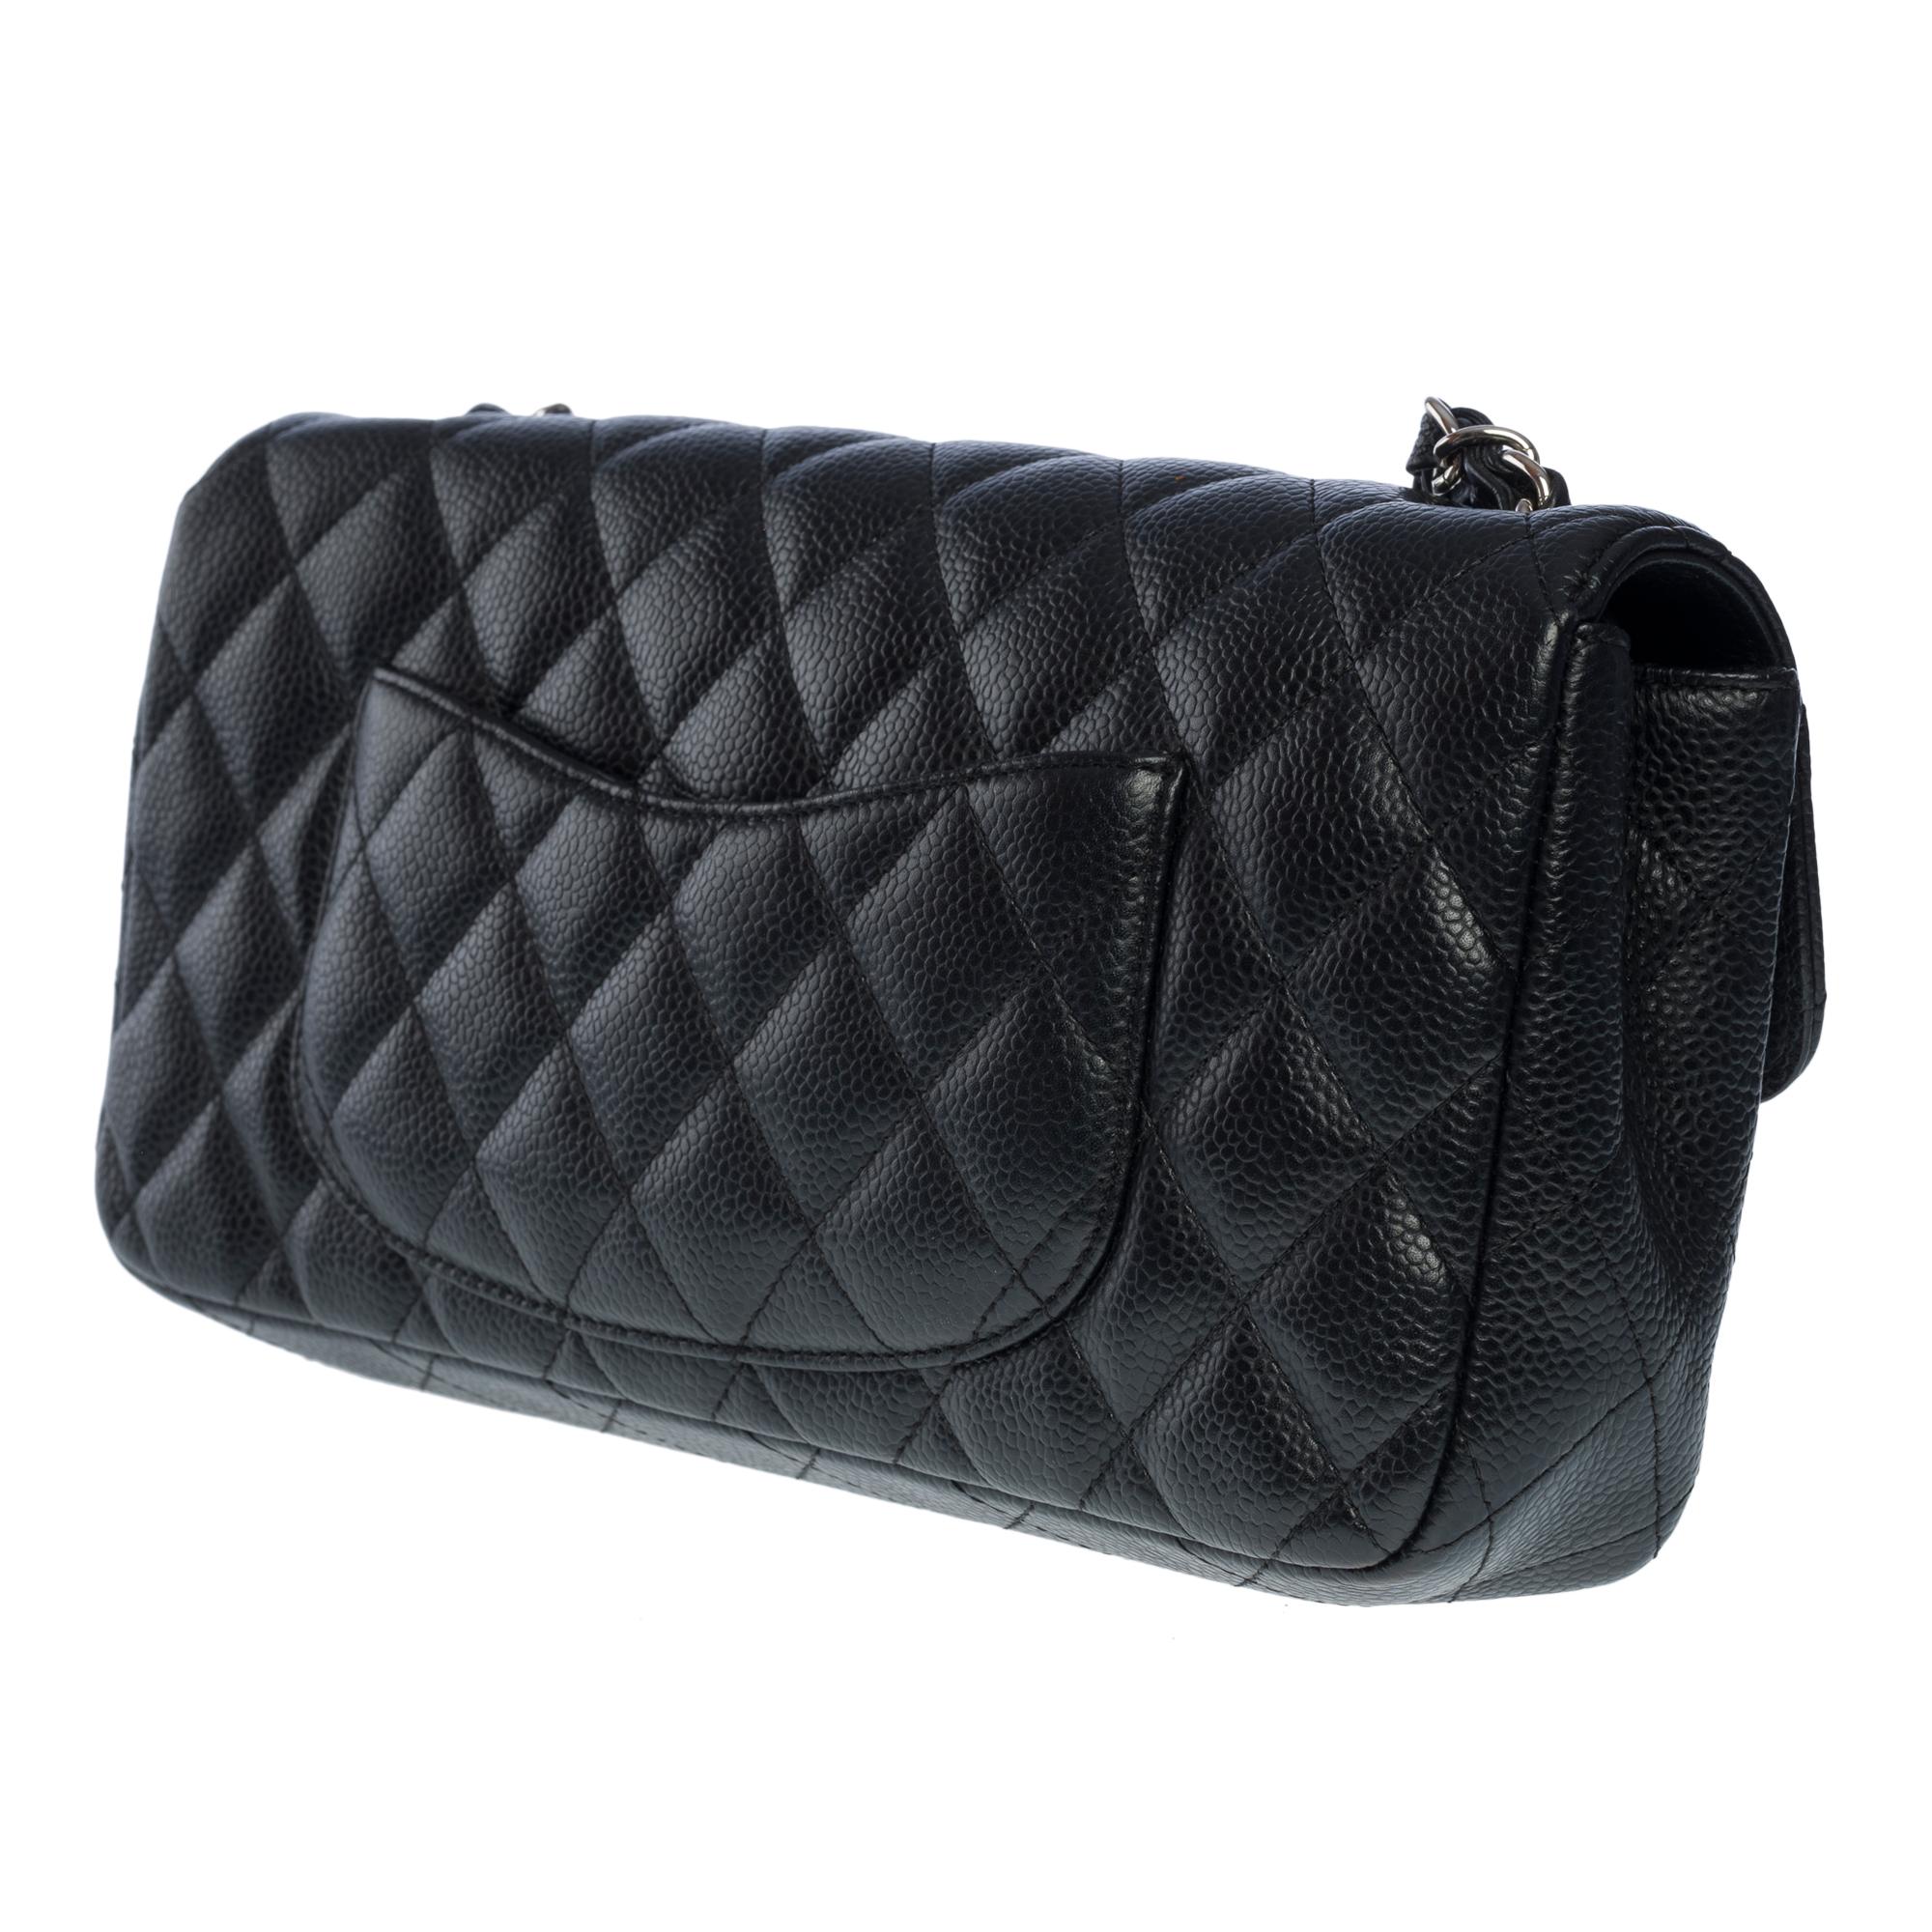 Chanel Classic Baguette shoulder bag in black caviar quilted leather , SHW 1